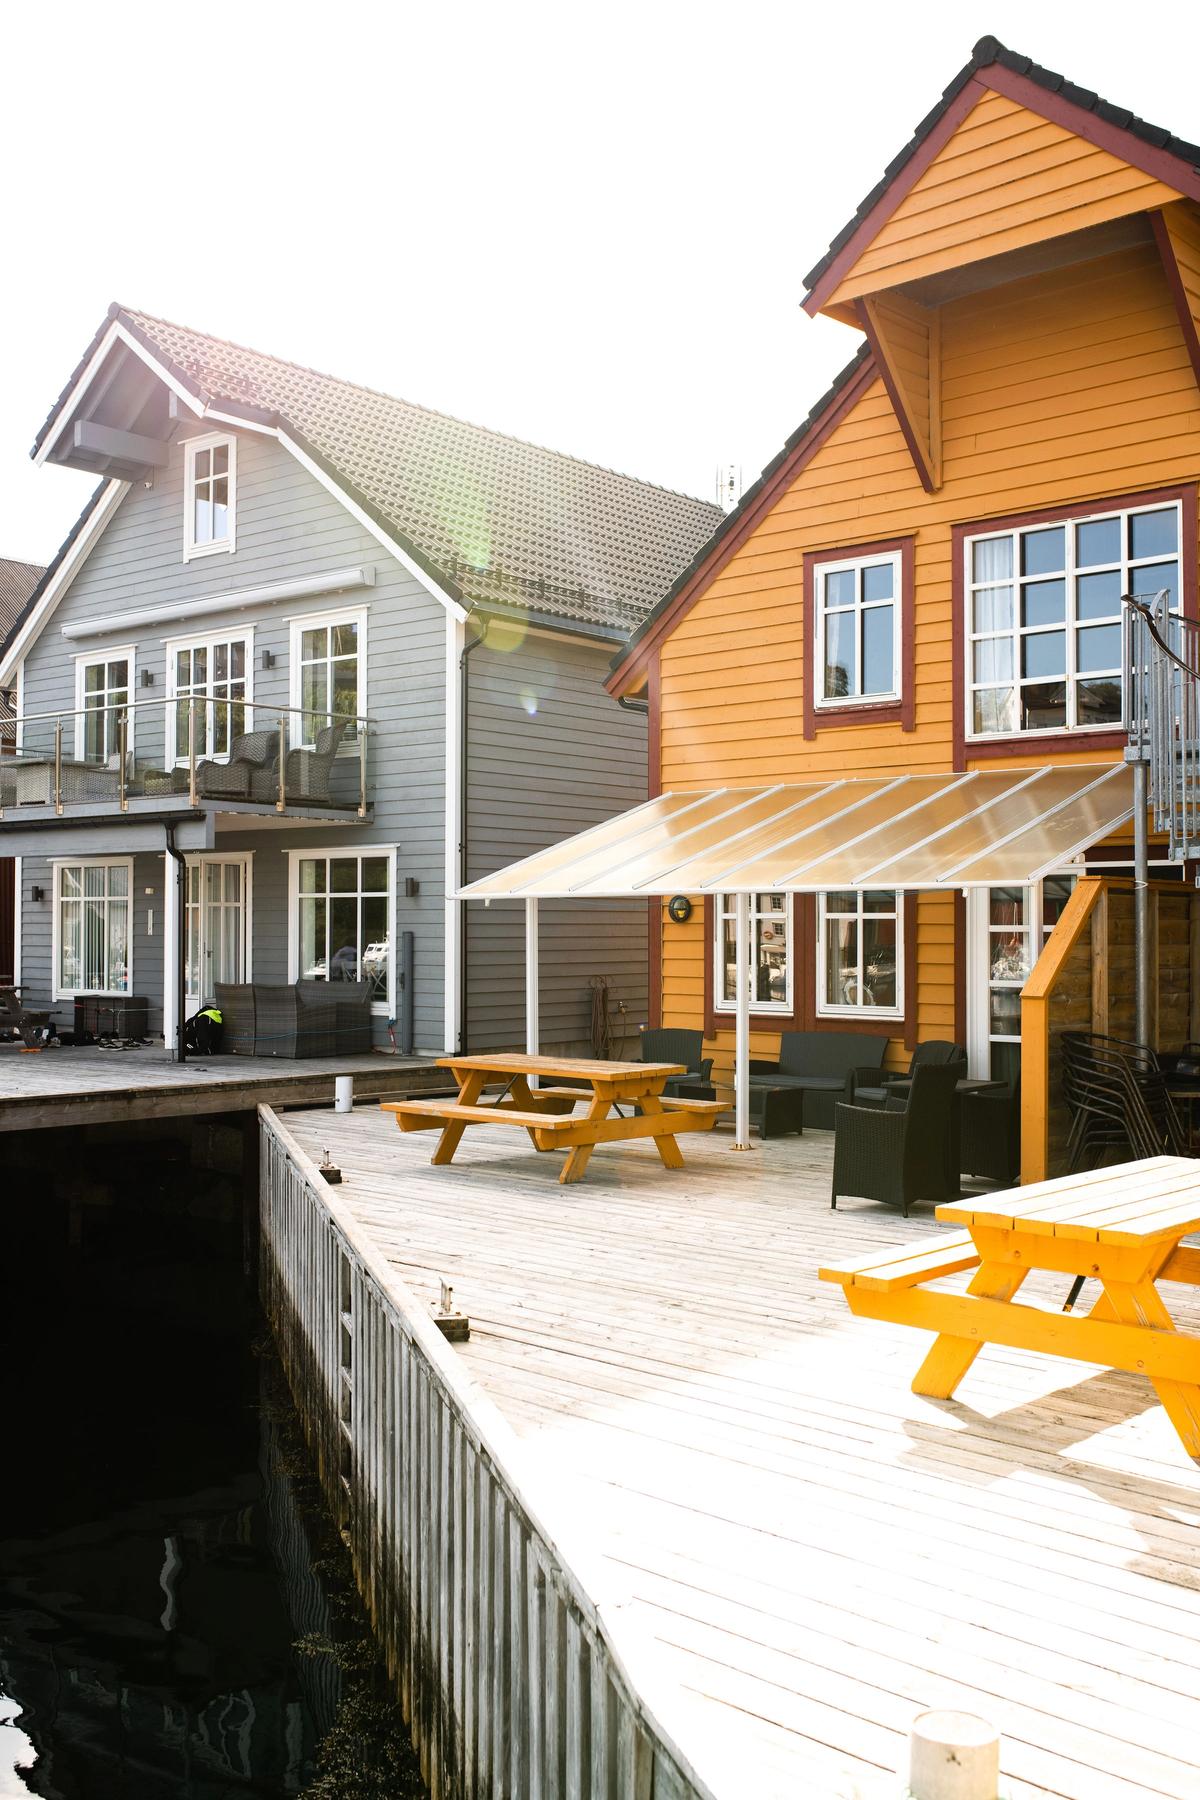 Picture of one grey and one orange cabin with outdoor tables in front on a dock.